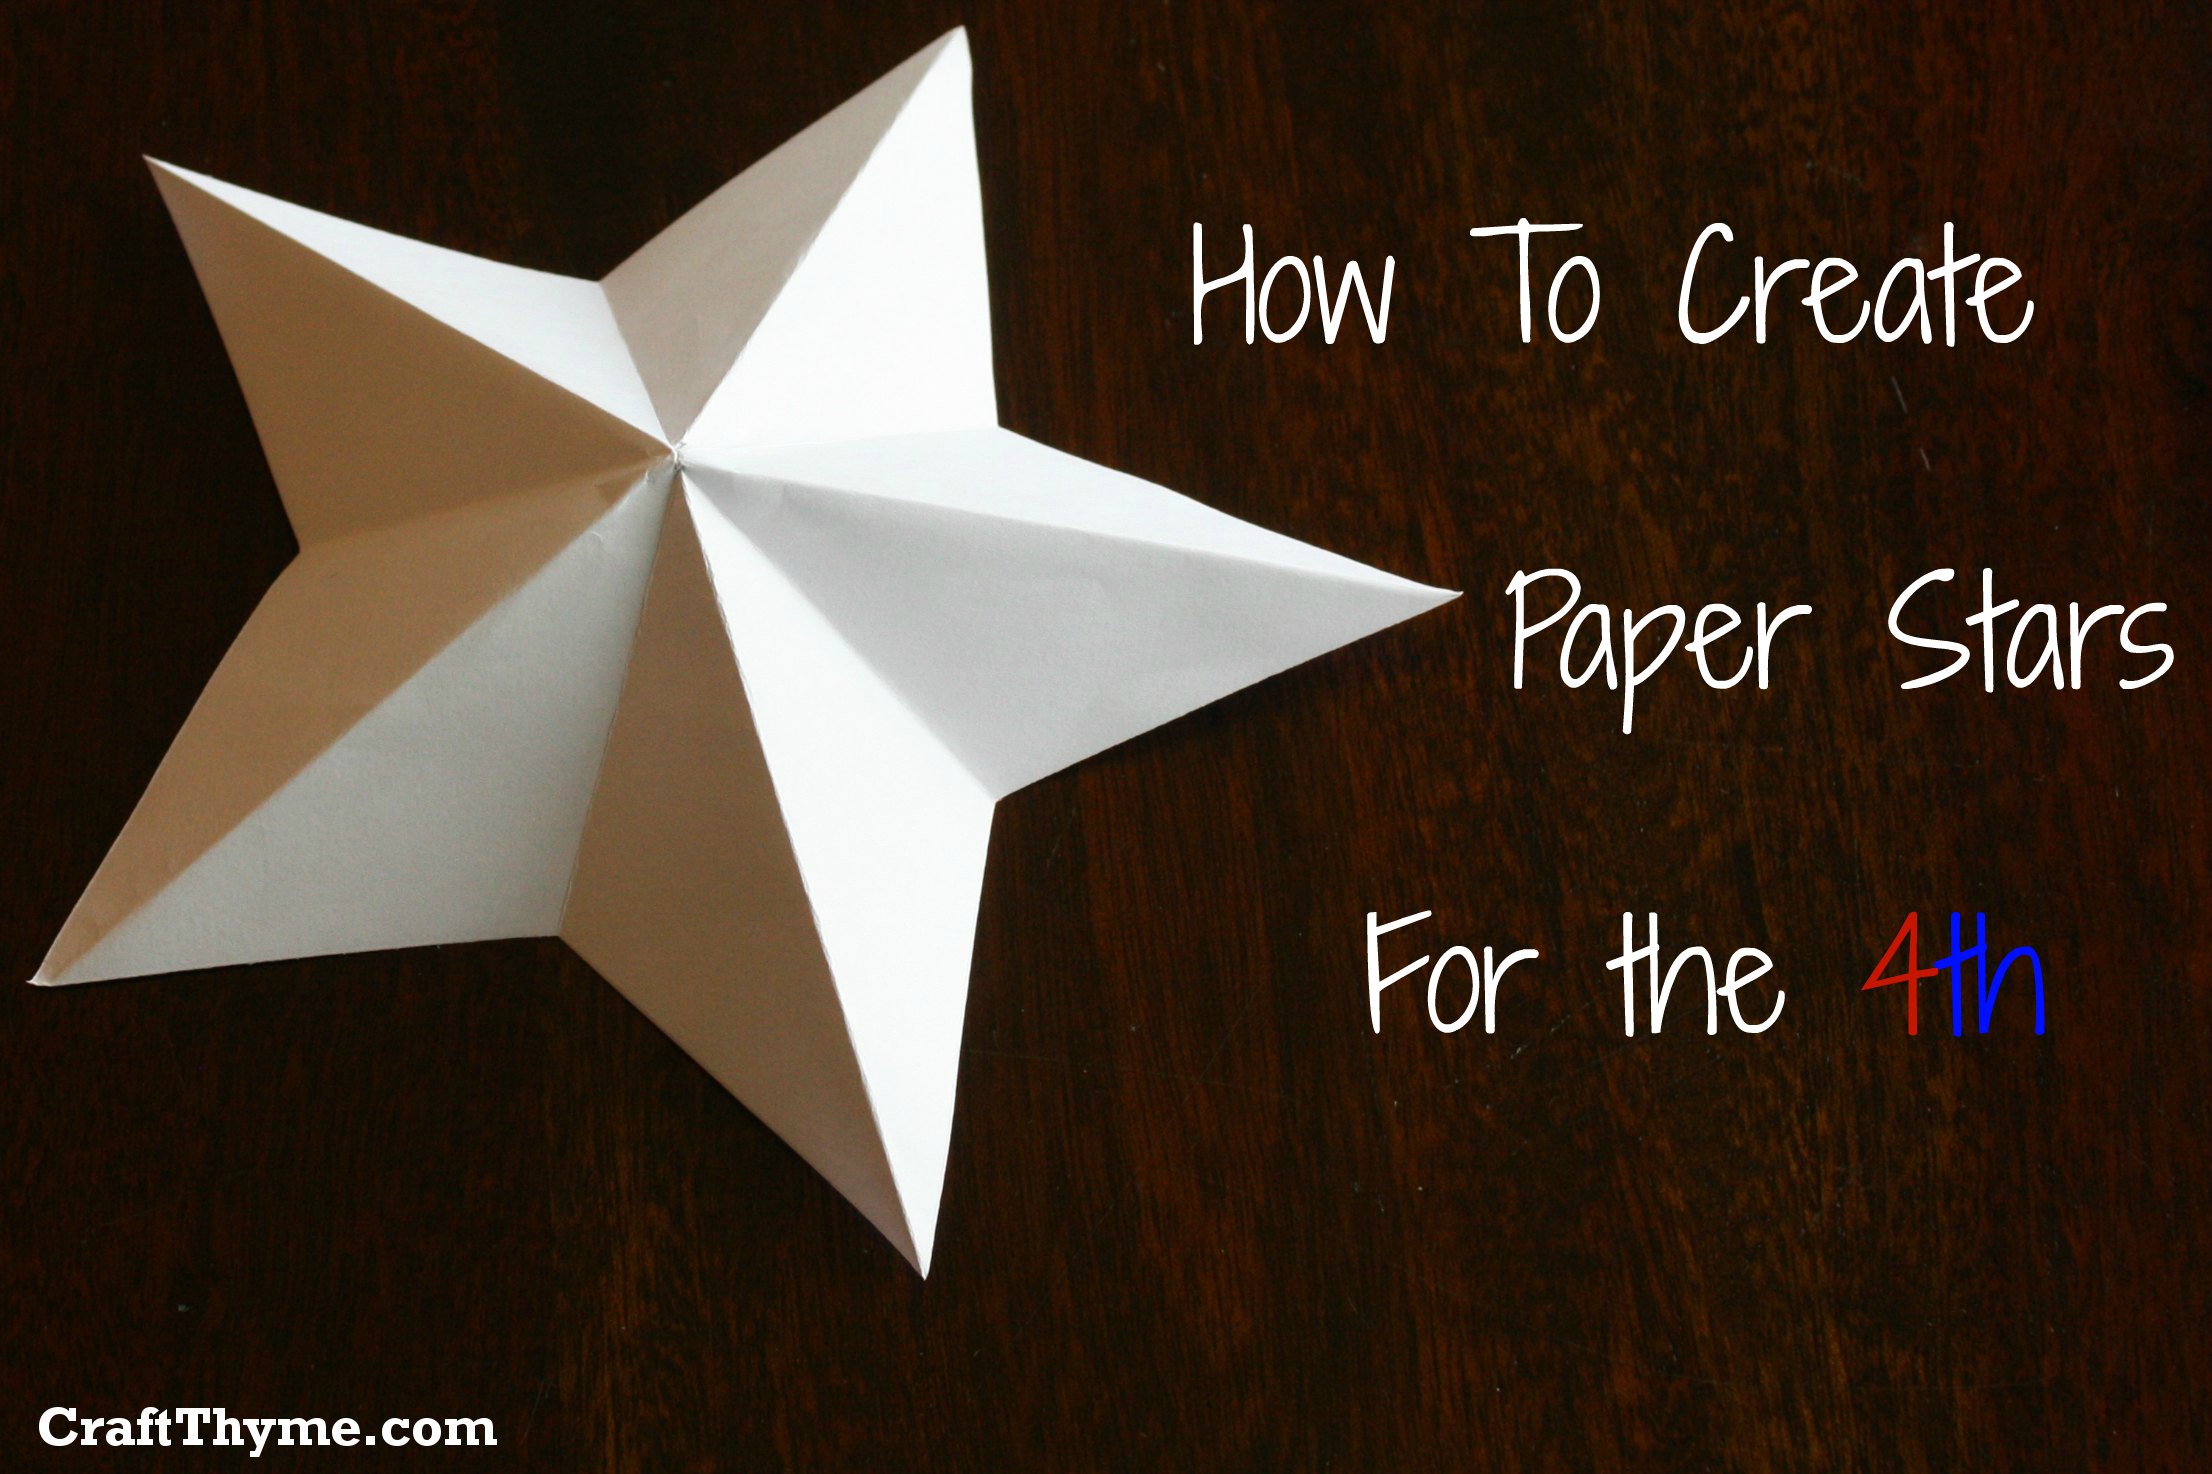 Paper Stars: How To Make 5 Pointed 3-D • Craft Thyme